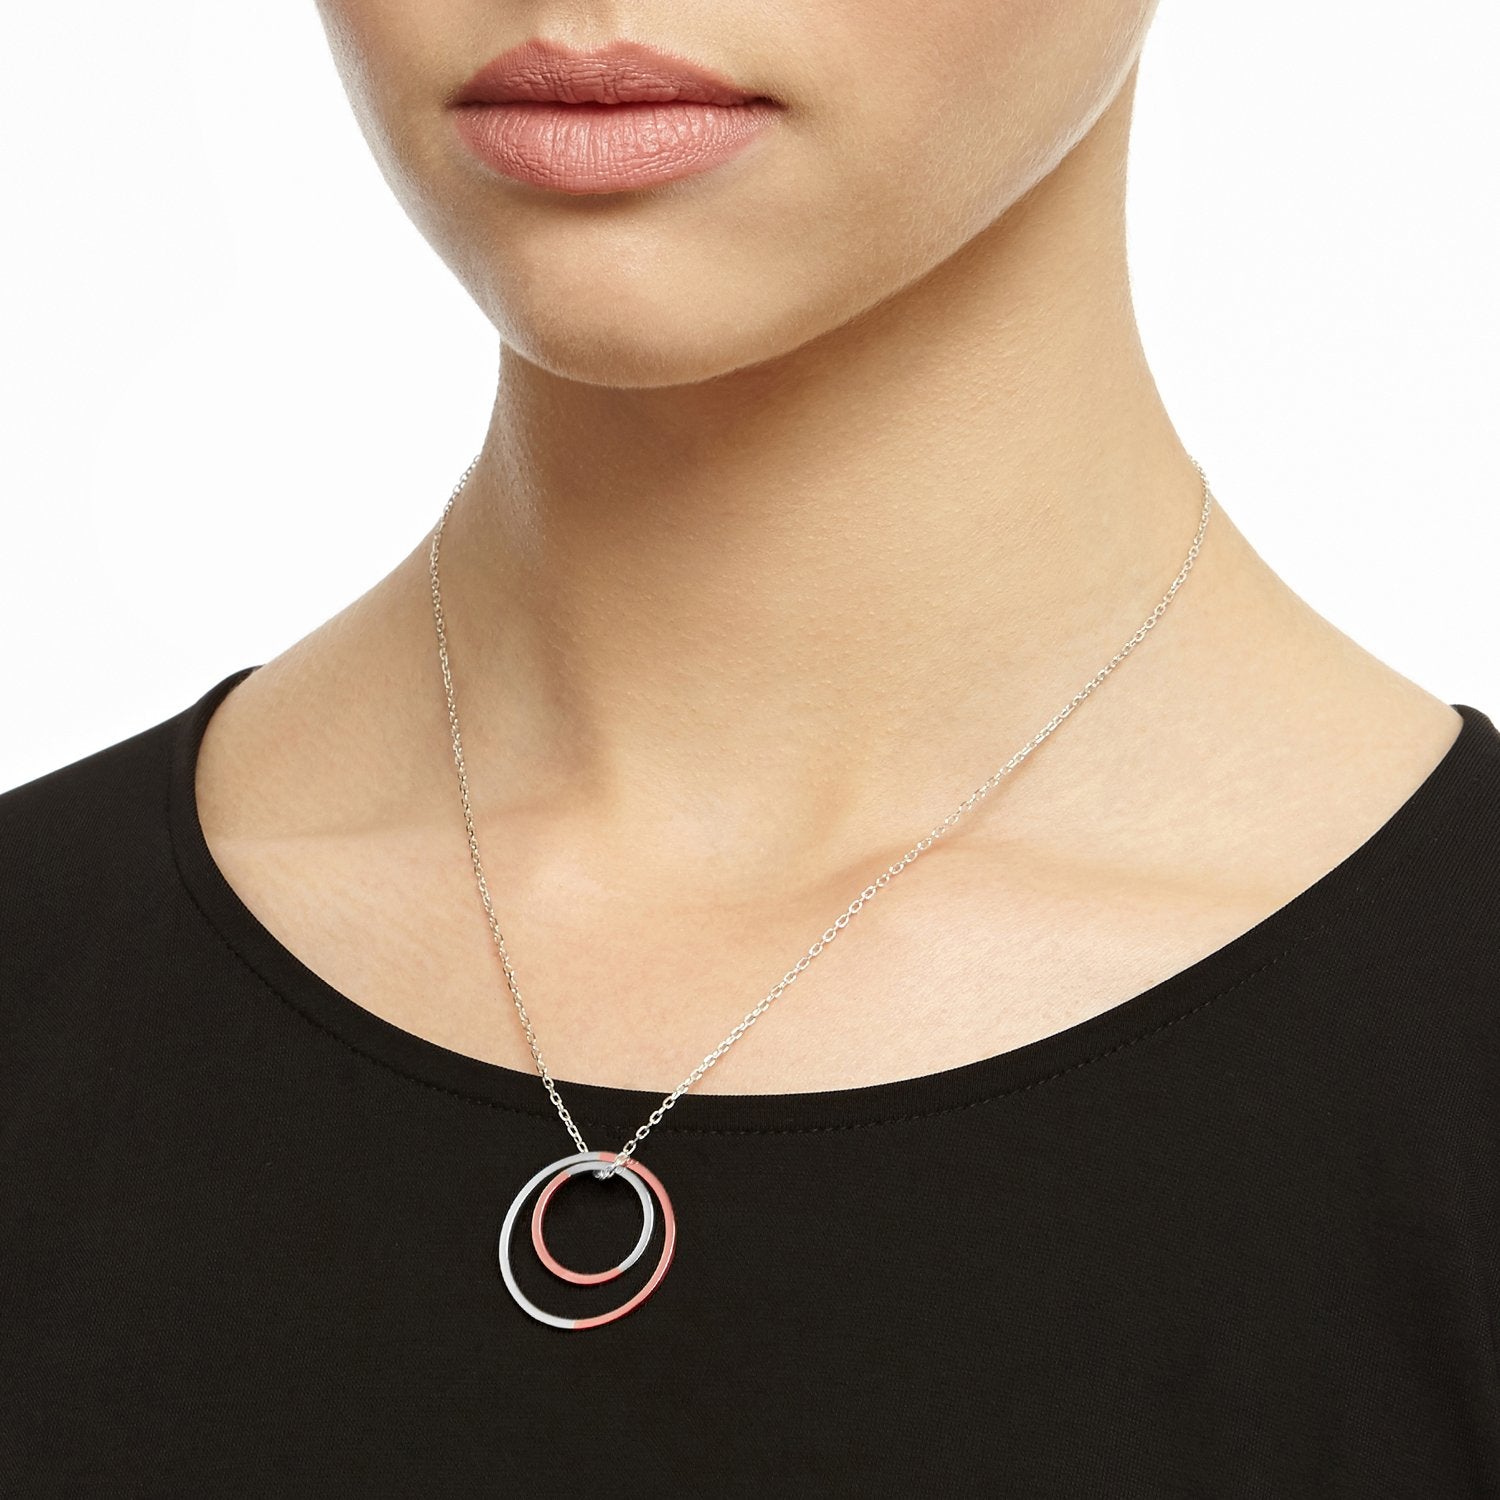 Two-tone Double Circle Necklace - 9k Rose Gold & Silver - Myia Bonner Jewellery